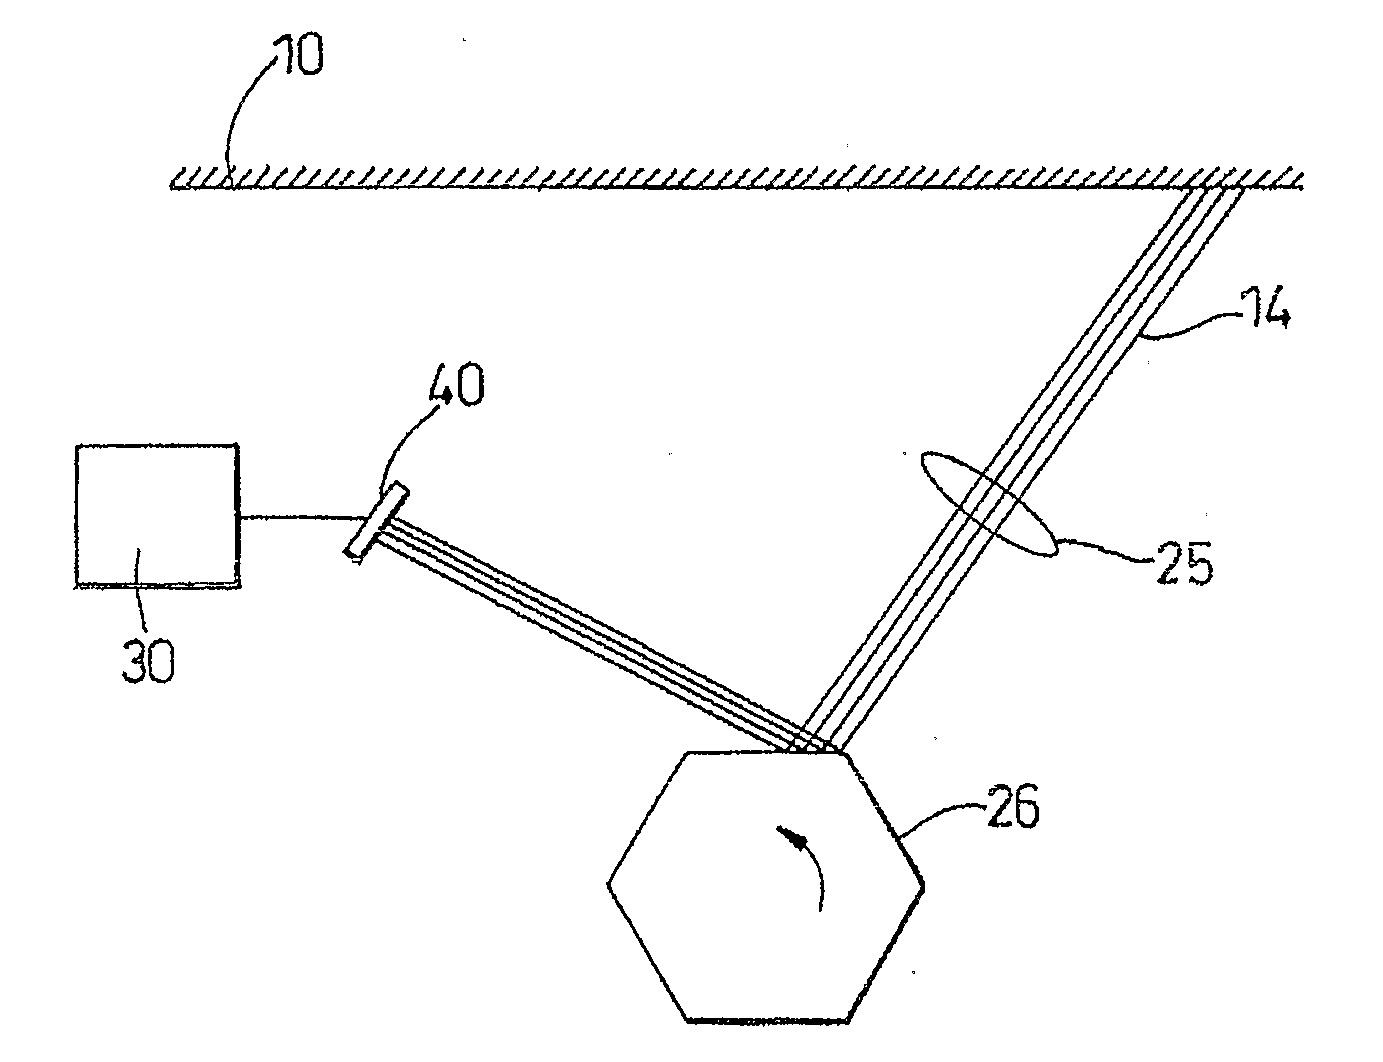 Apparatus and method of reducing banding artifact visibility in a scanning apparatus